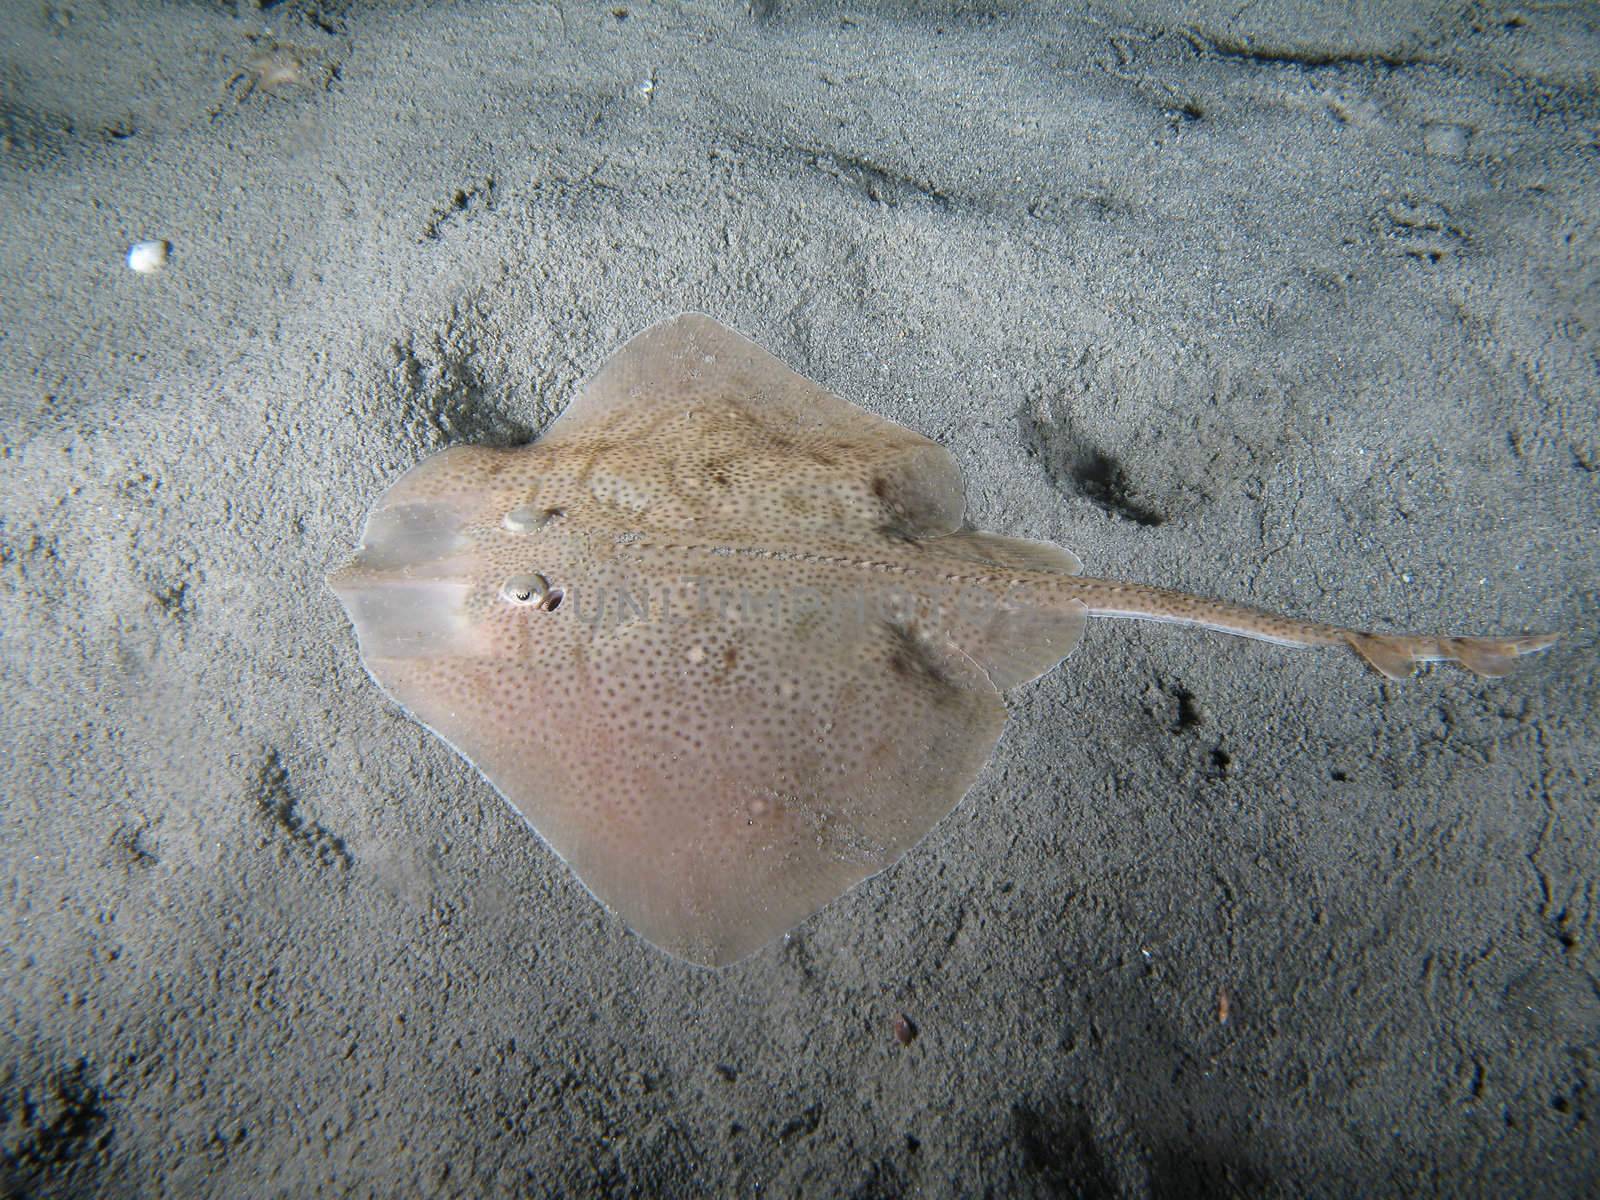 Raya Clavata on the sand also known as Thornback Ray (USA - England) or Raye ouclèe (France) or Raya de Clavos (Espagna). Shotted in the wild nighttime.